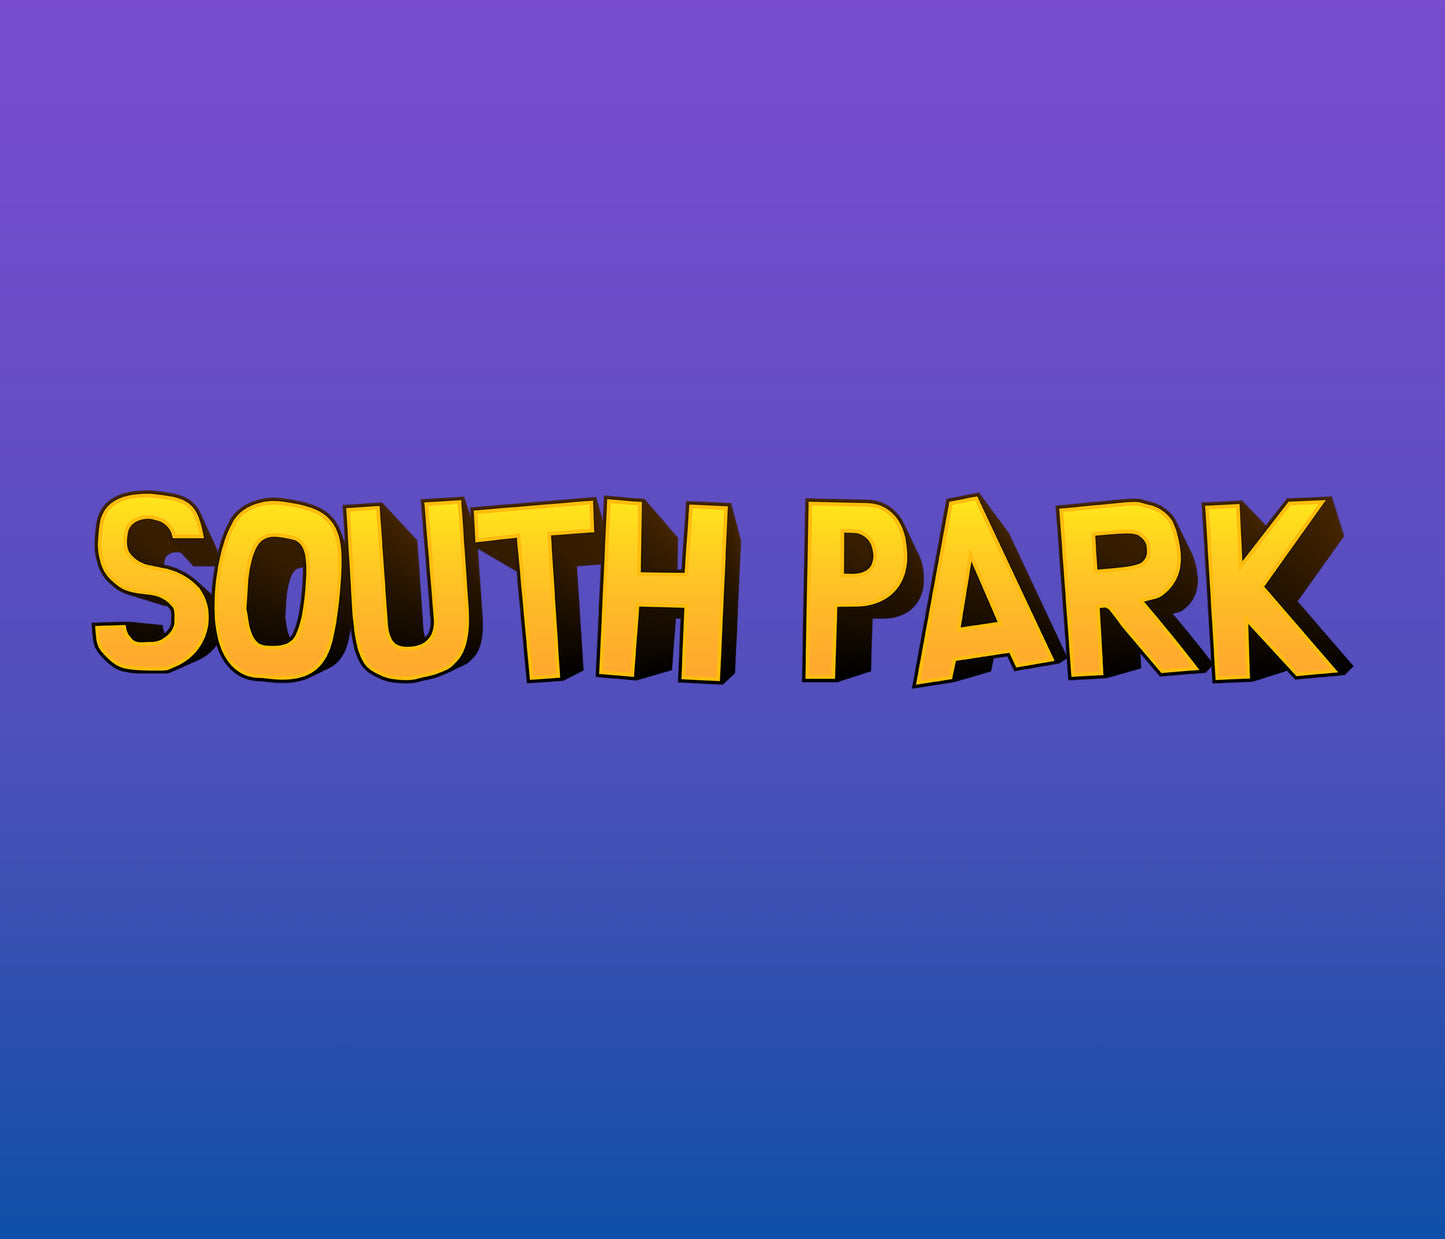 South Park-Inspired Textured Font